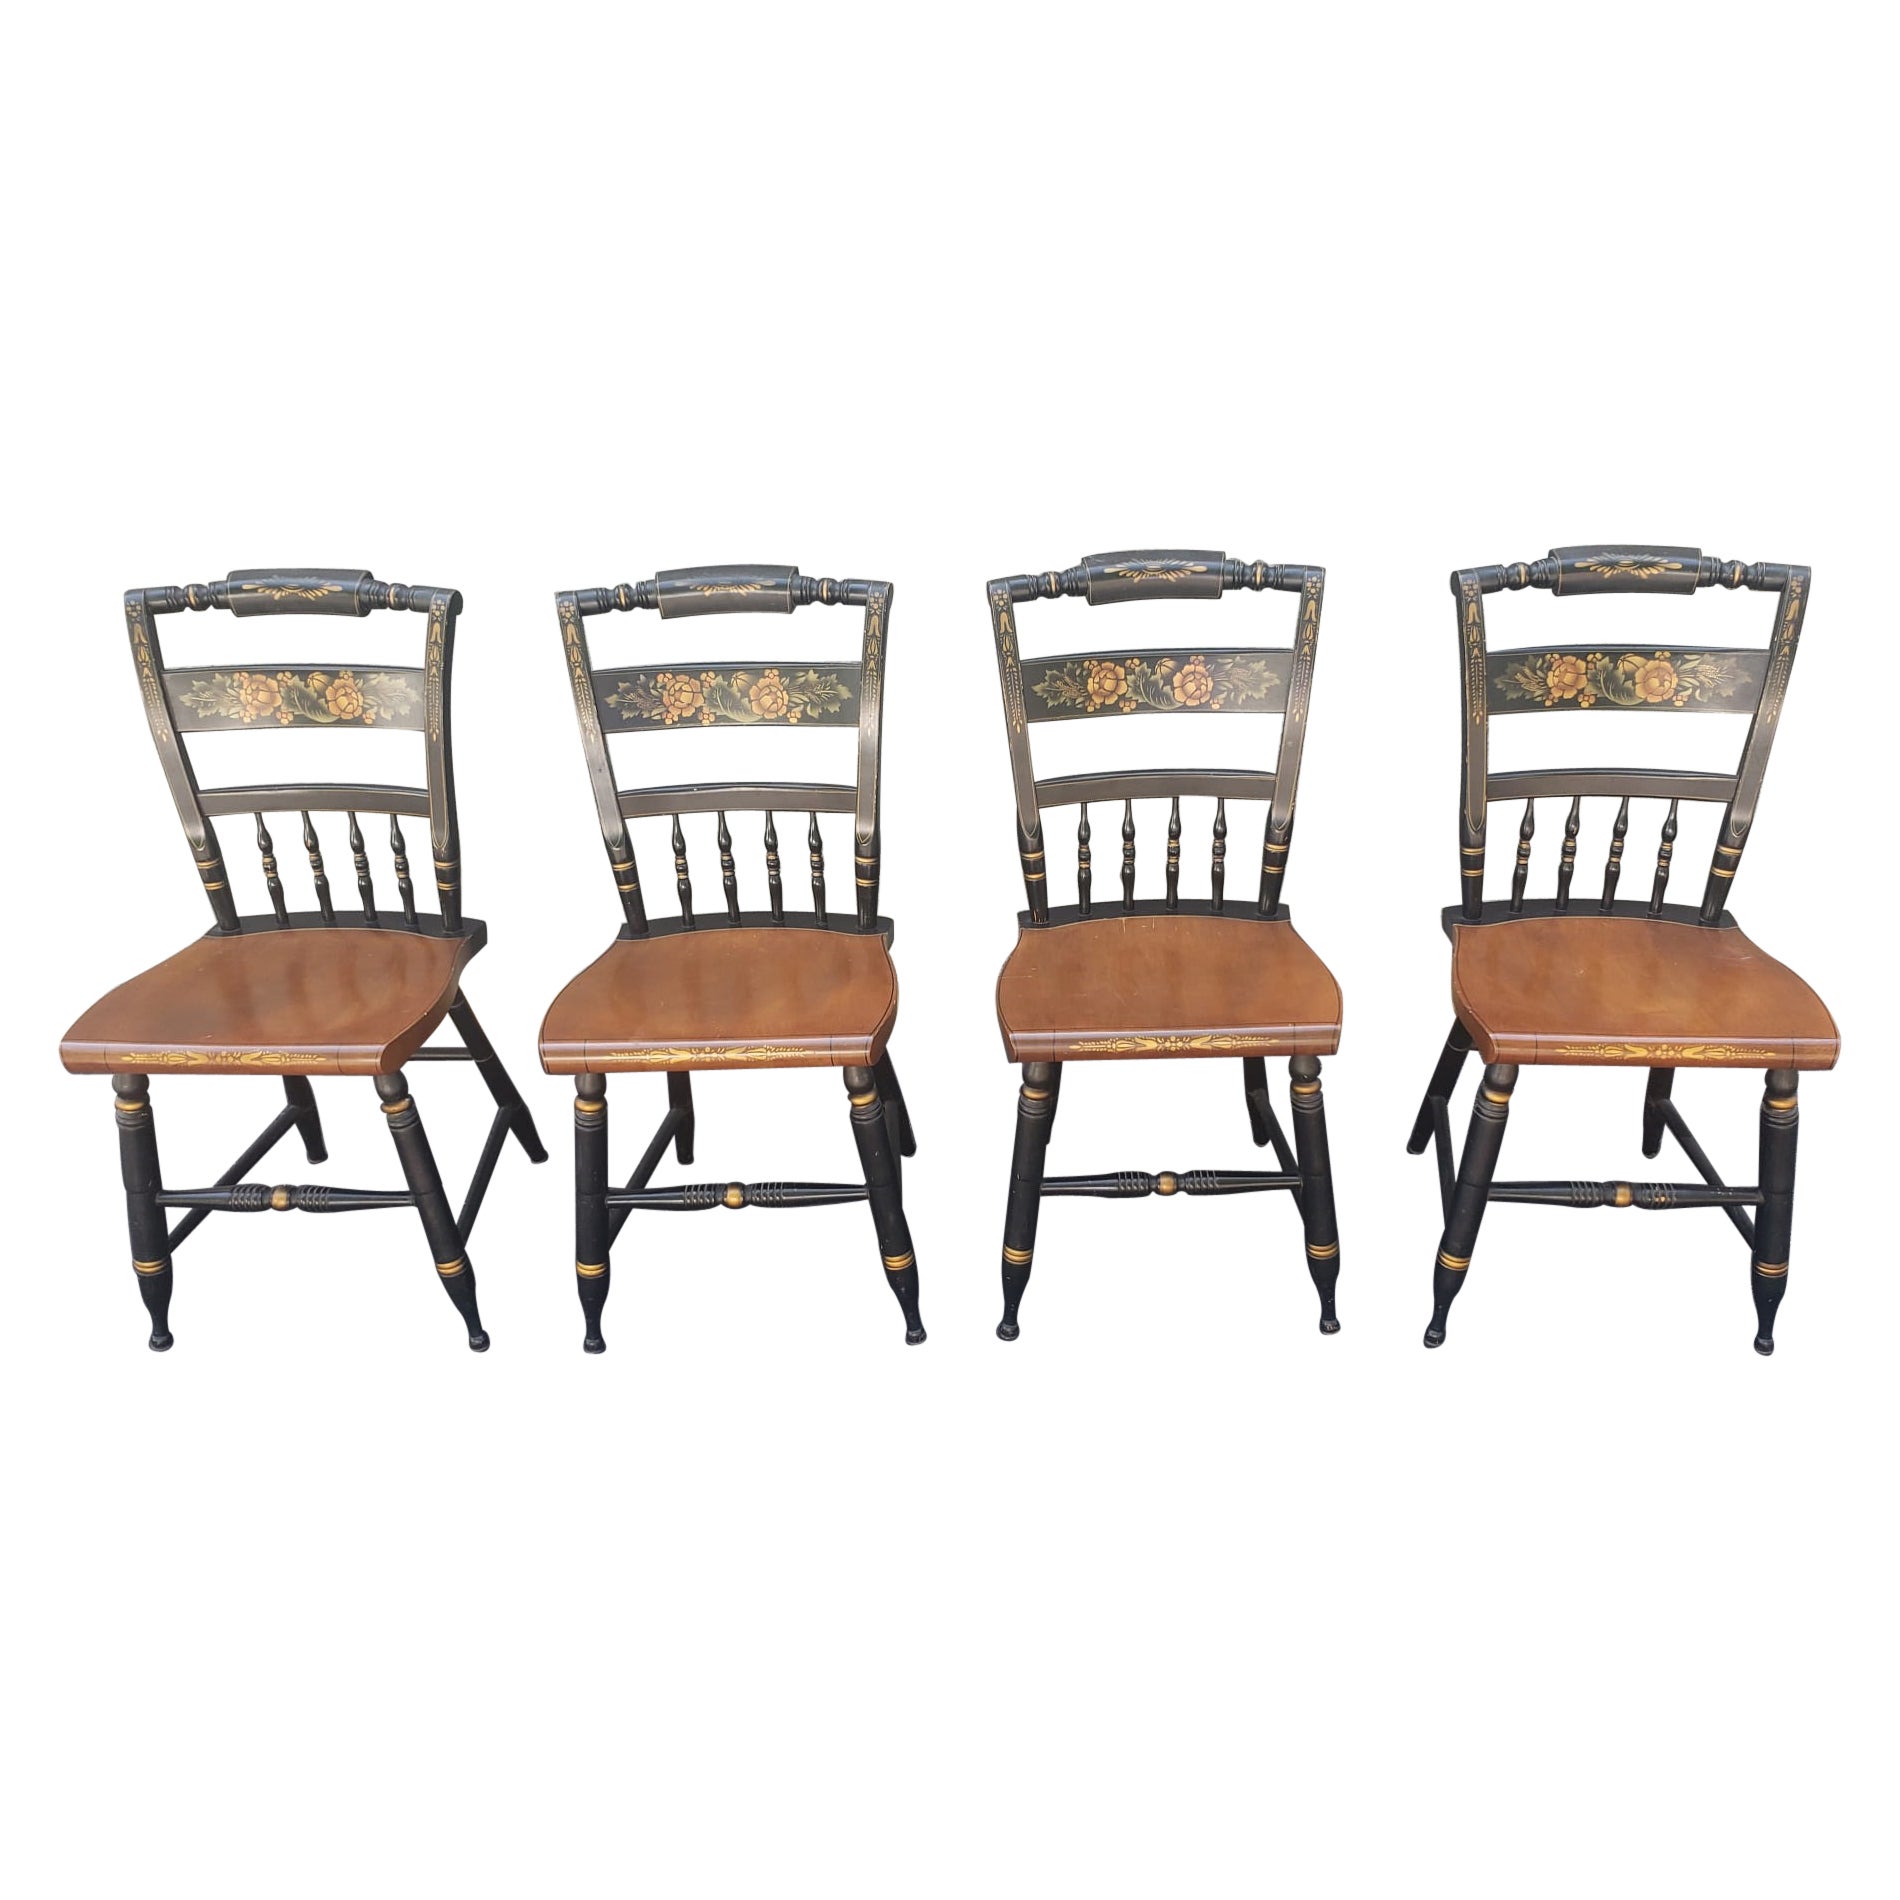 Set of 4 Lambert Hitchcock Ebonized and Gilt Ornate Maple Dining Chairs For Sale